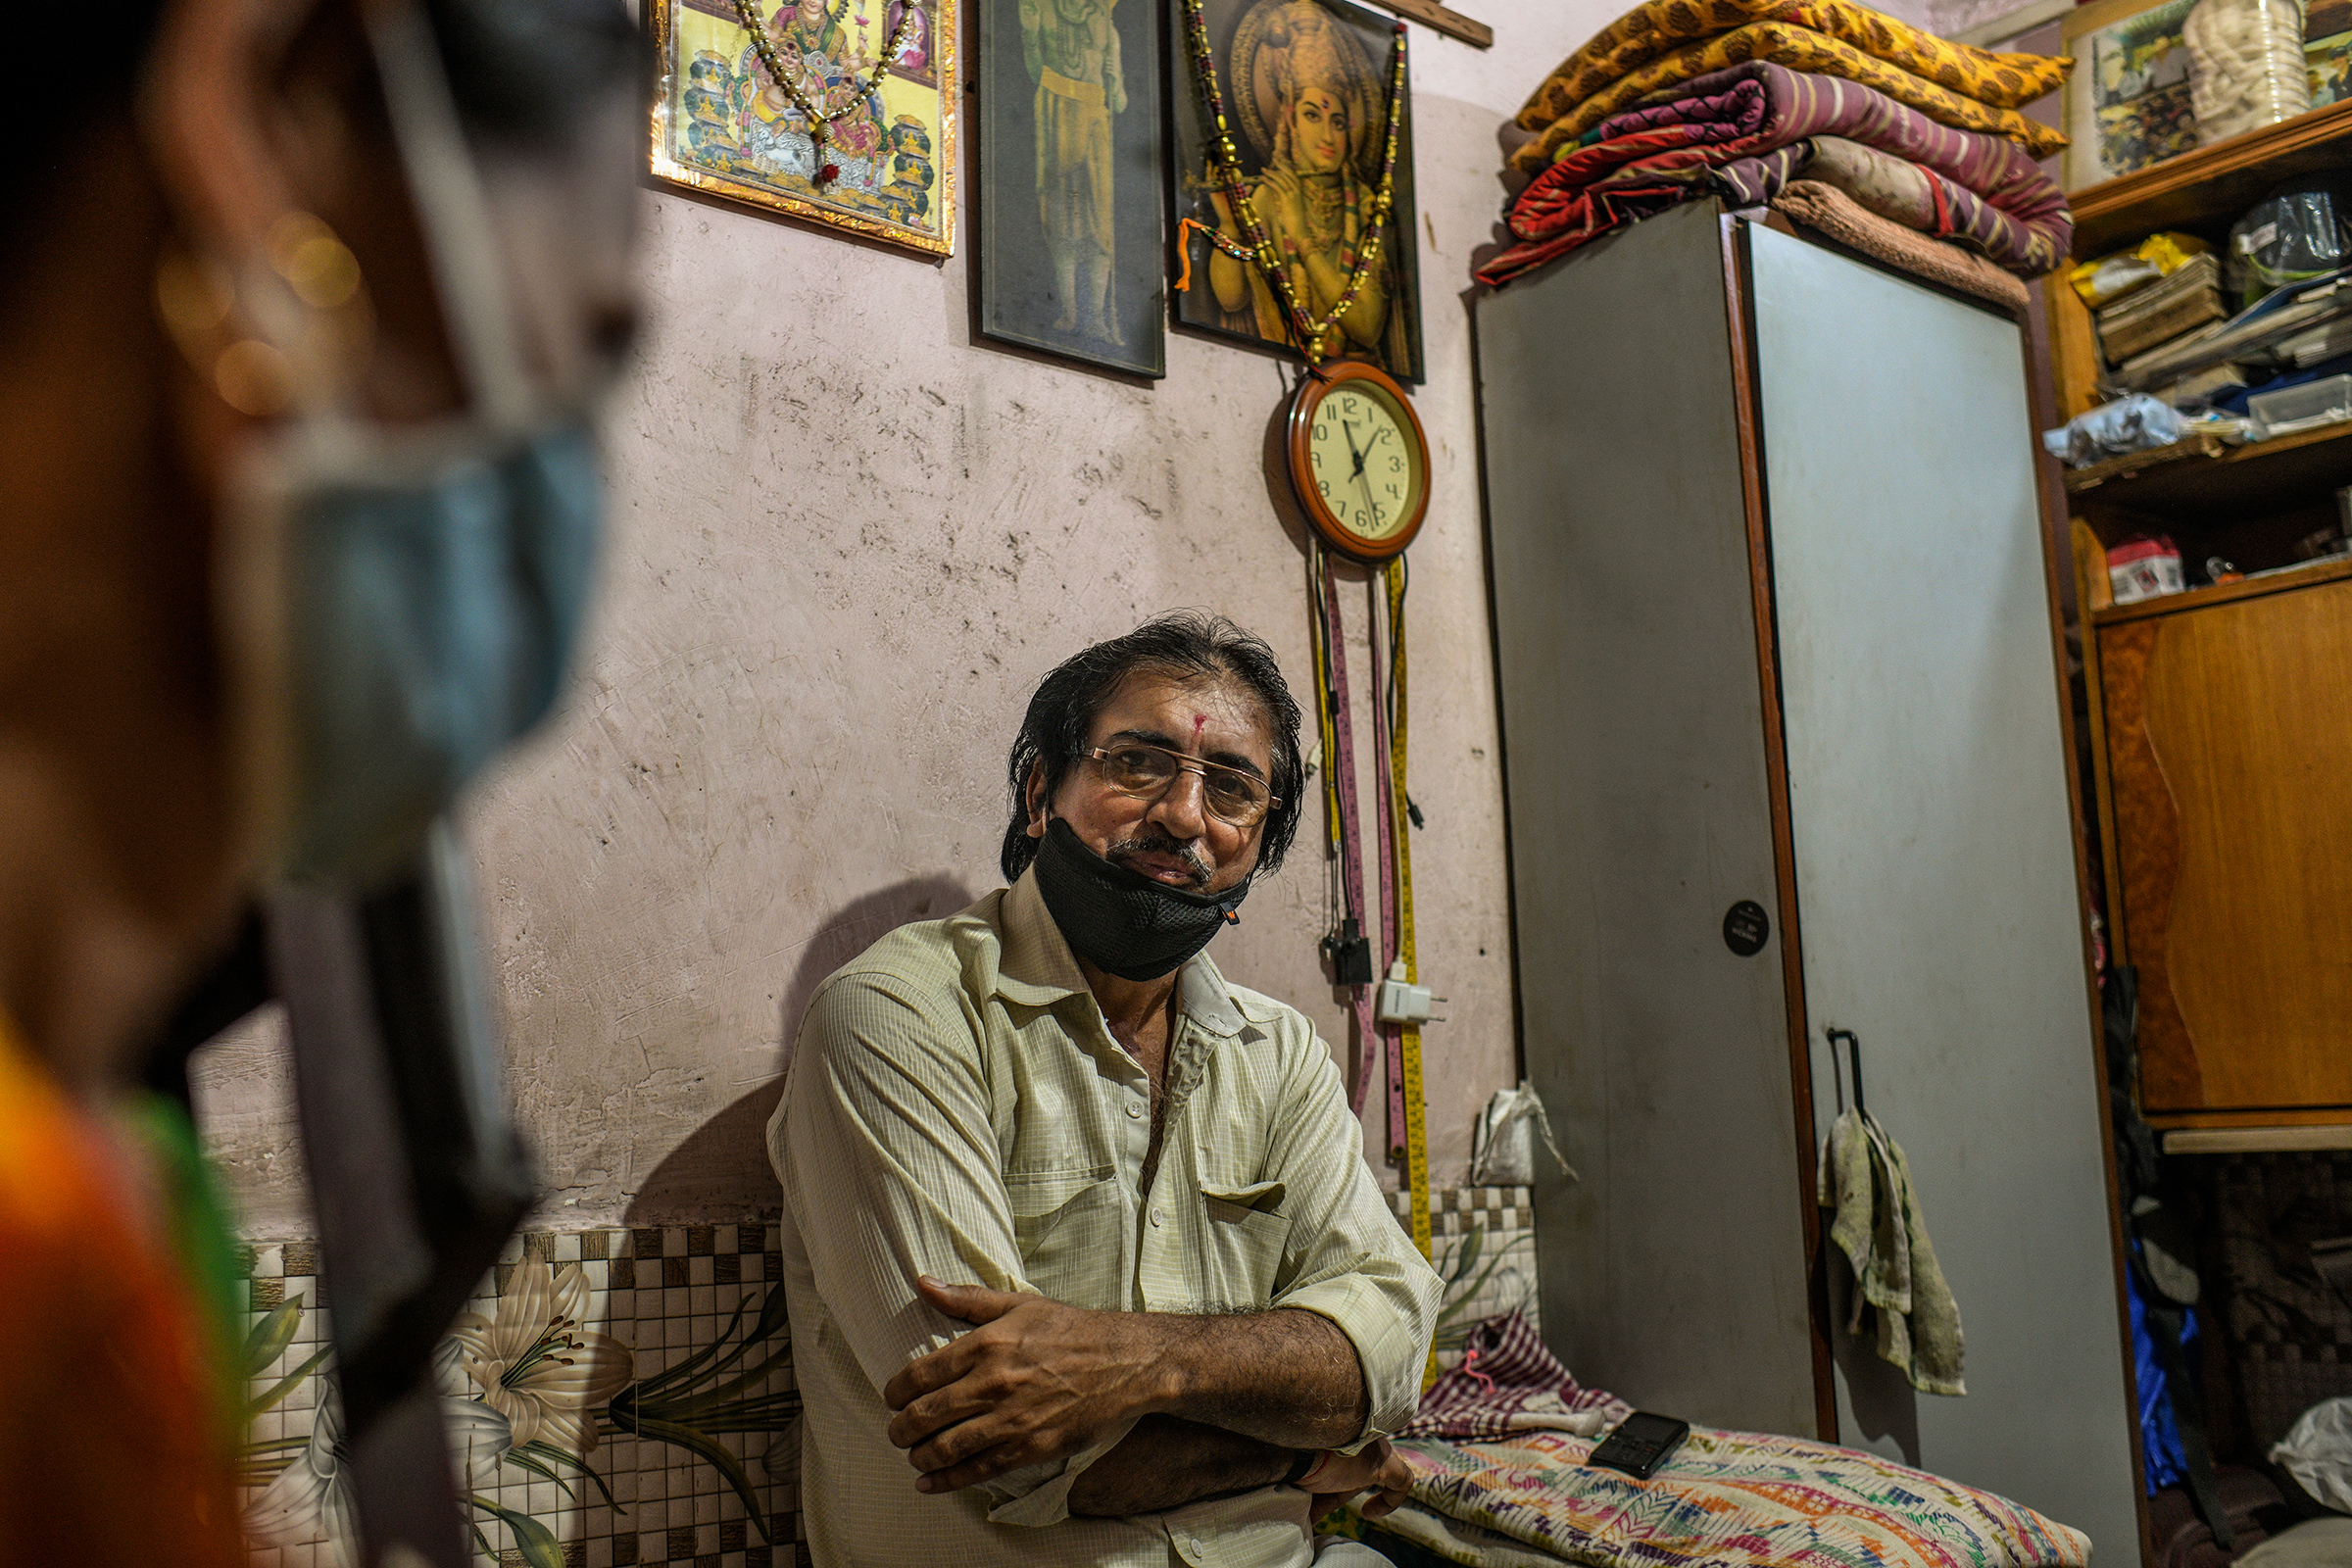 Jayanti Keshav Parmar, a tailor, at his home in Dharavi. His sewing machine sits idle, as no one in the neighborhood can afford to have new clothes stitched this year.